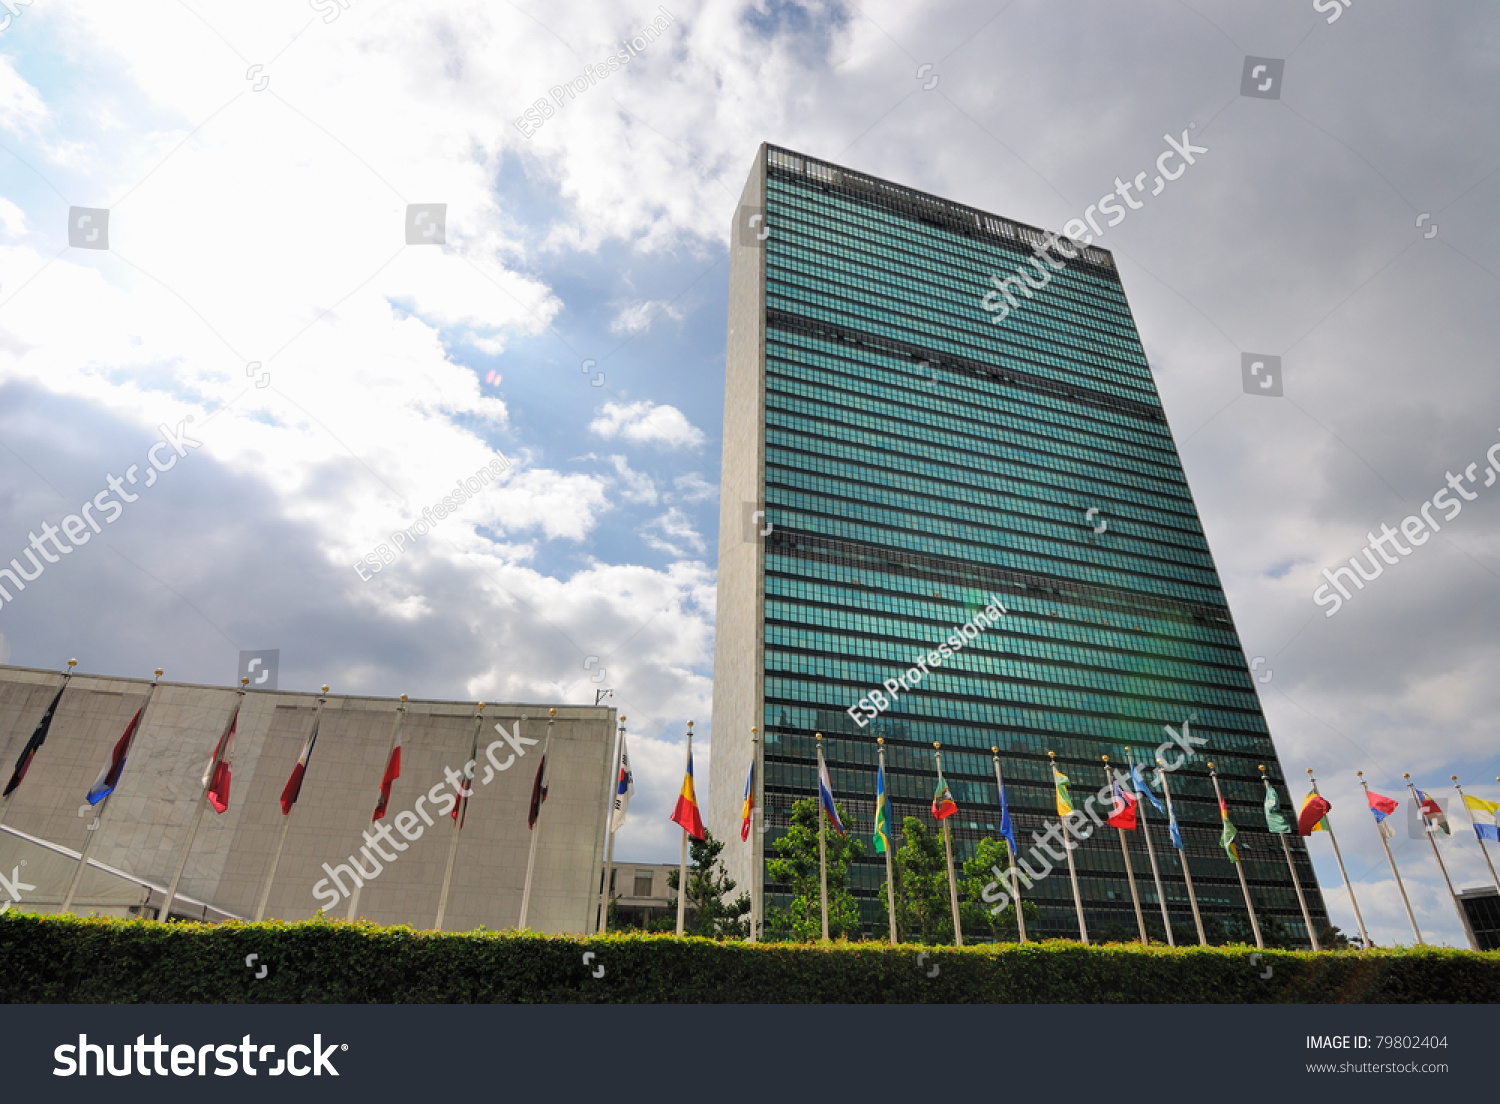 New York City - June 17: The United Nations Building In Manhattan Is ...